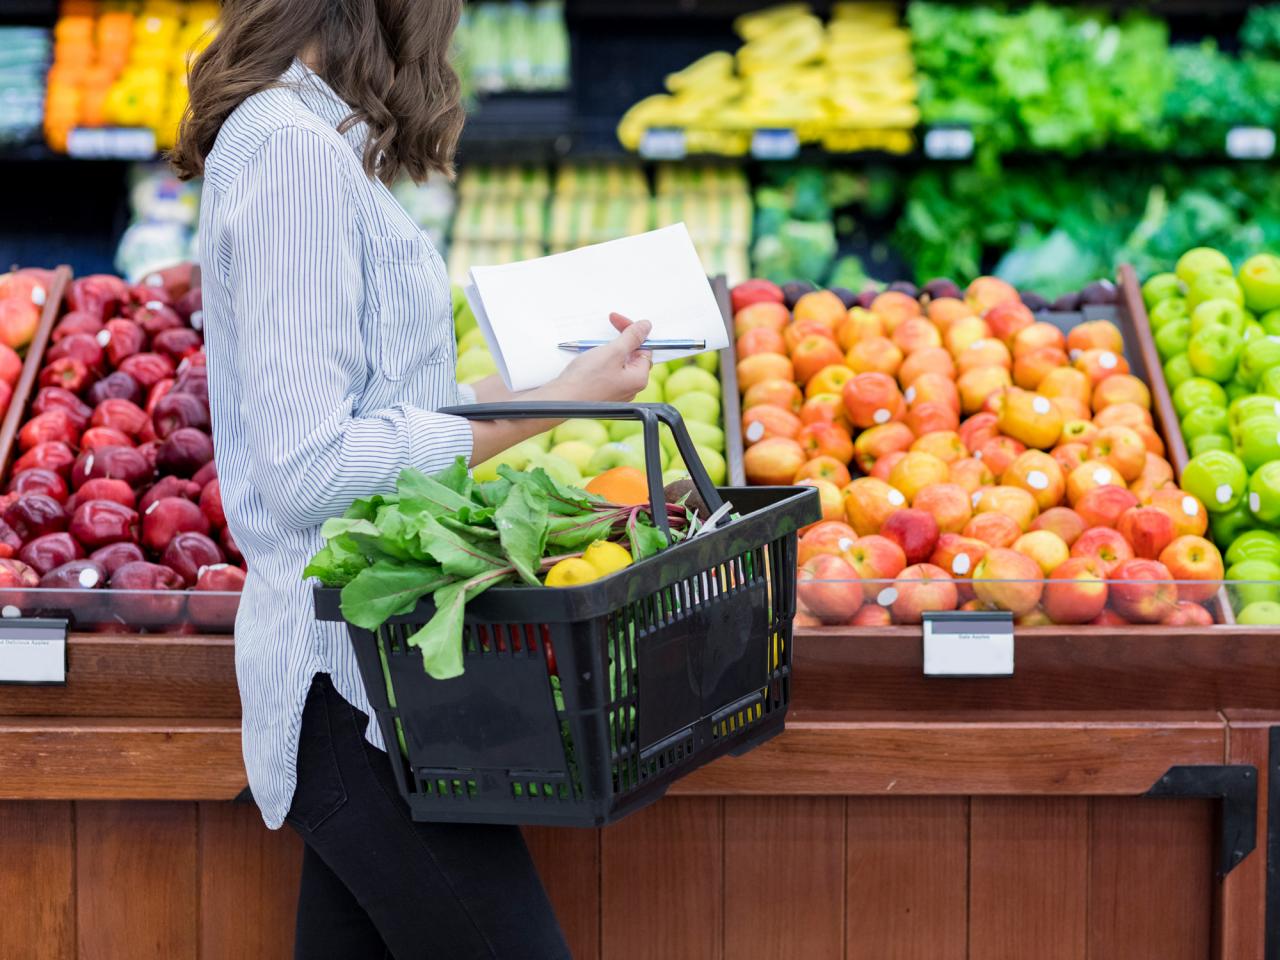 14 Cheapest Fresh Fruits And Vegetables You Can Find At The Grocery Store Year-Round